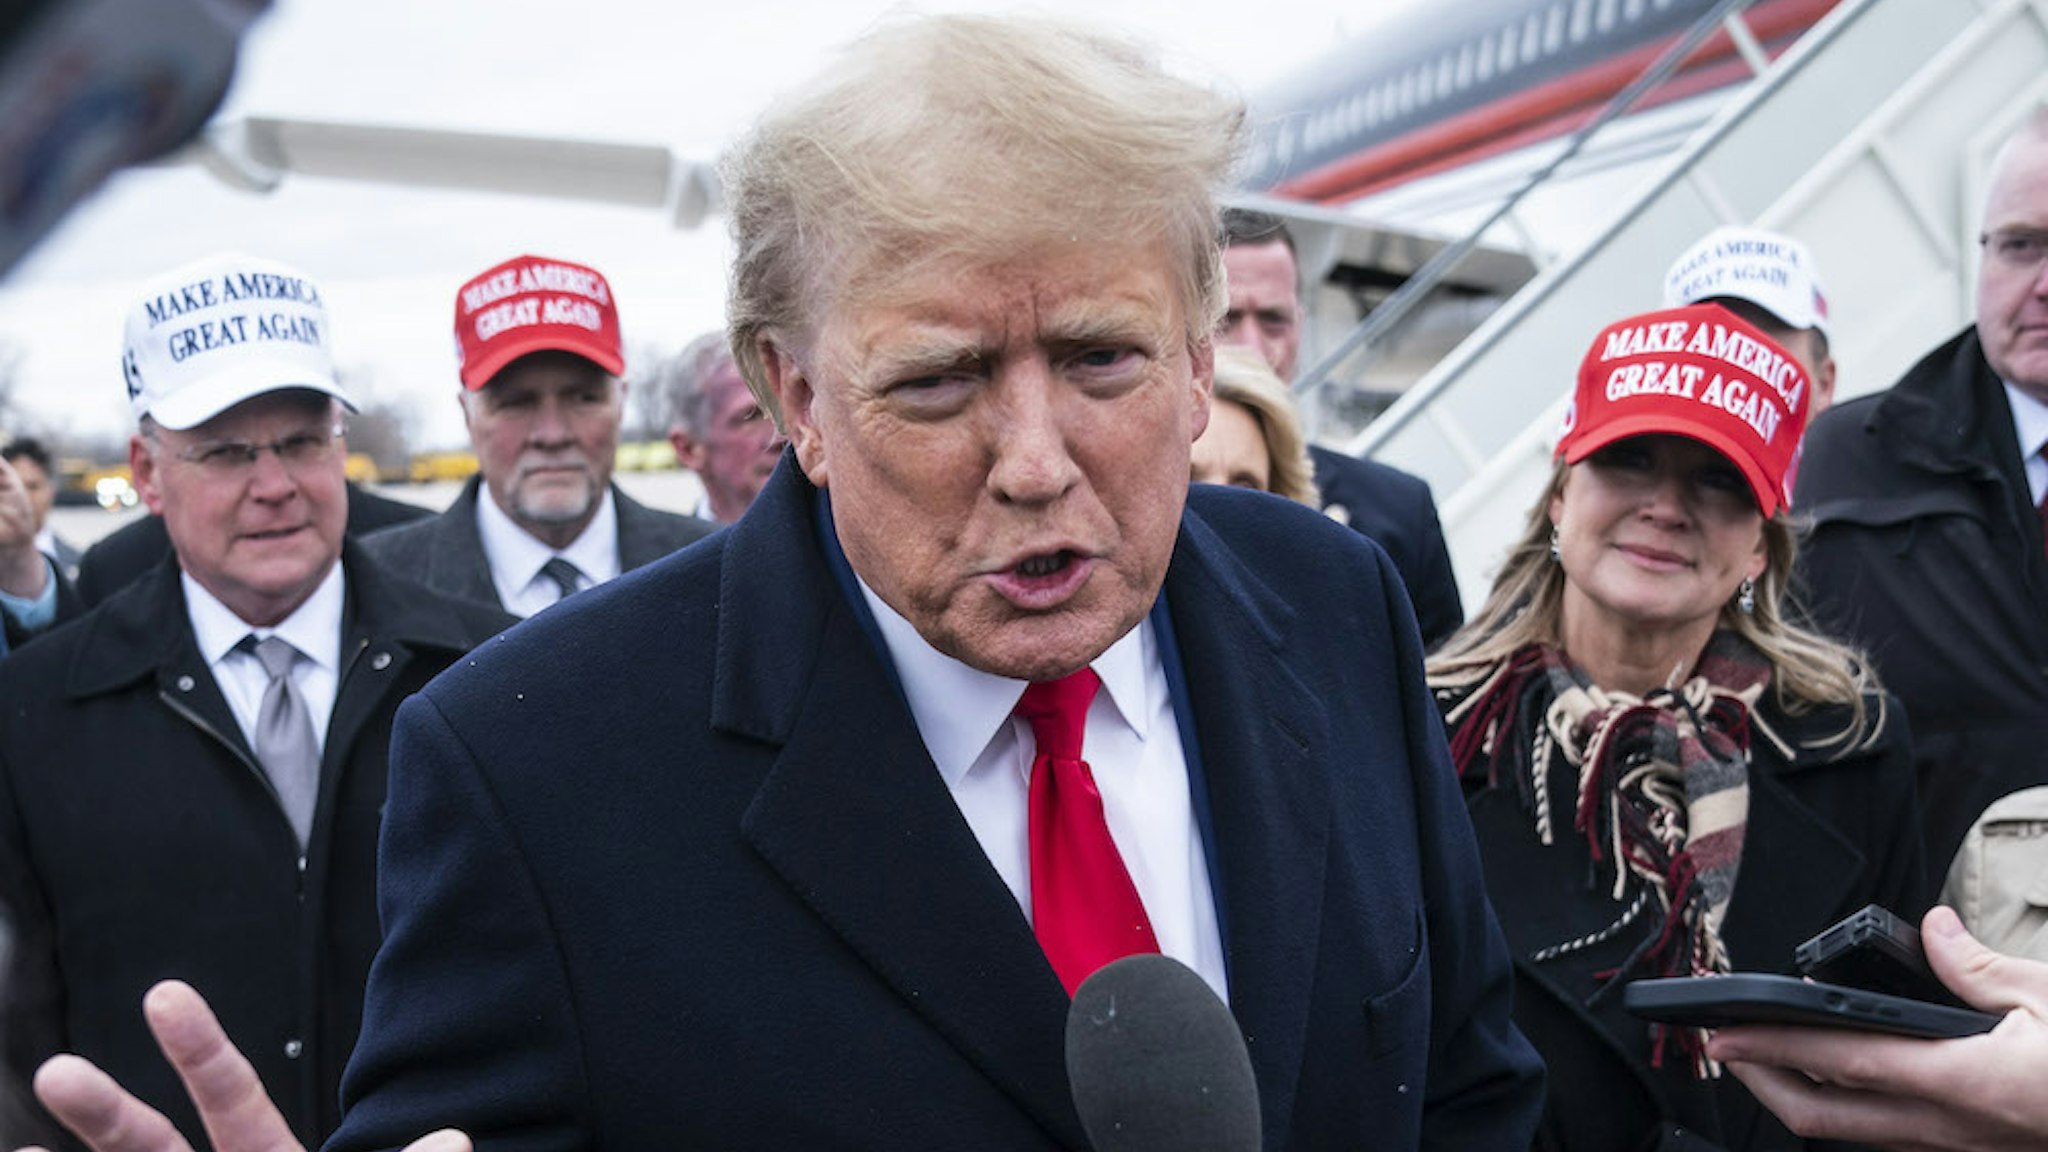 Moline, IL - March 13 : Former President Donald Trump speaks with reporters as he lands at Quad City International Airport in route to Iowa on Monday, March 13, 2023, in Moline, IL. (Photo by Jabin Botsford/The Washington Post via Getty Images)